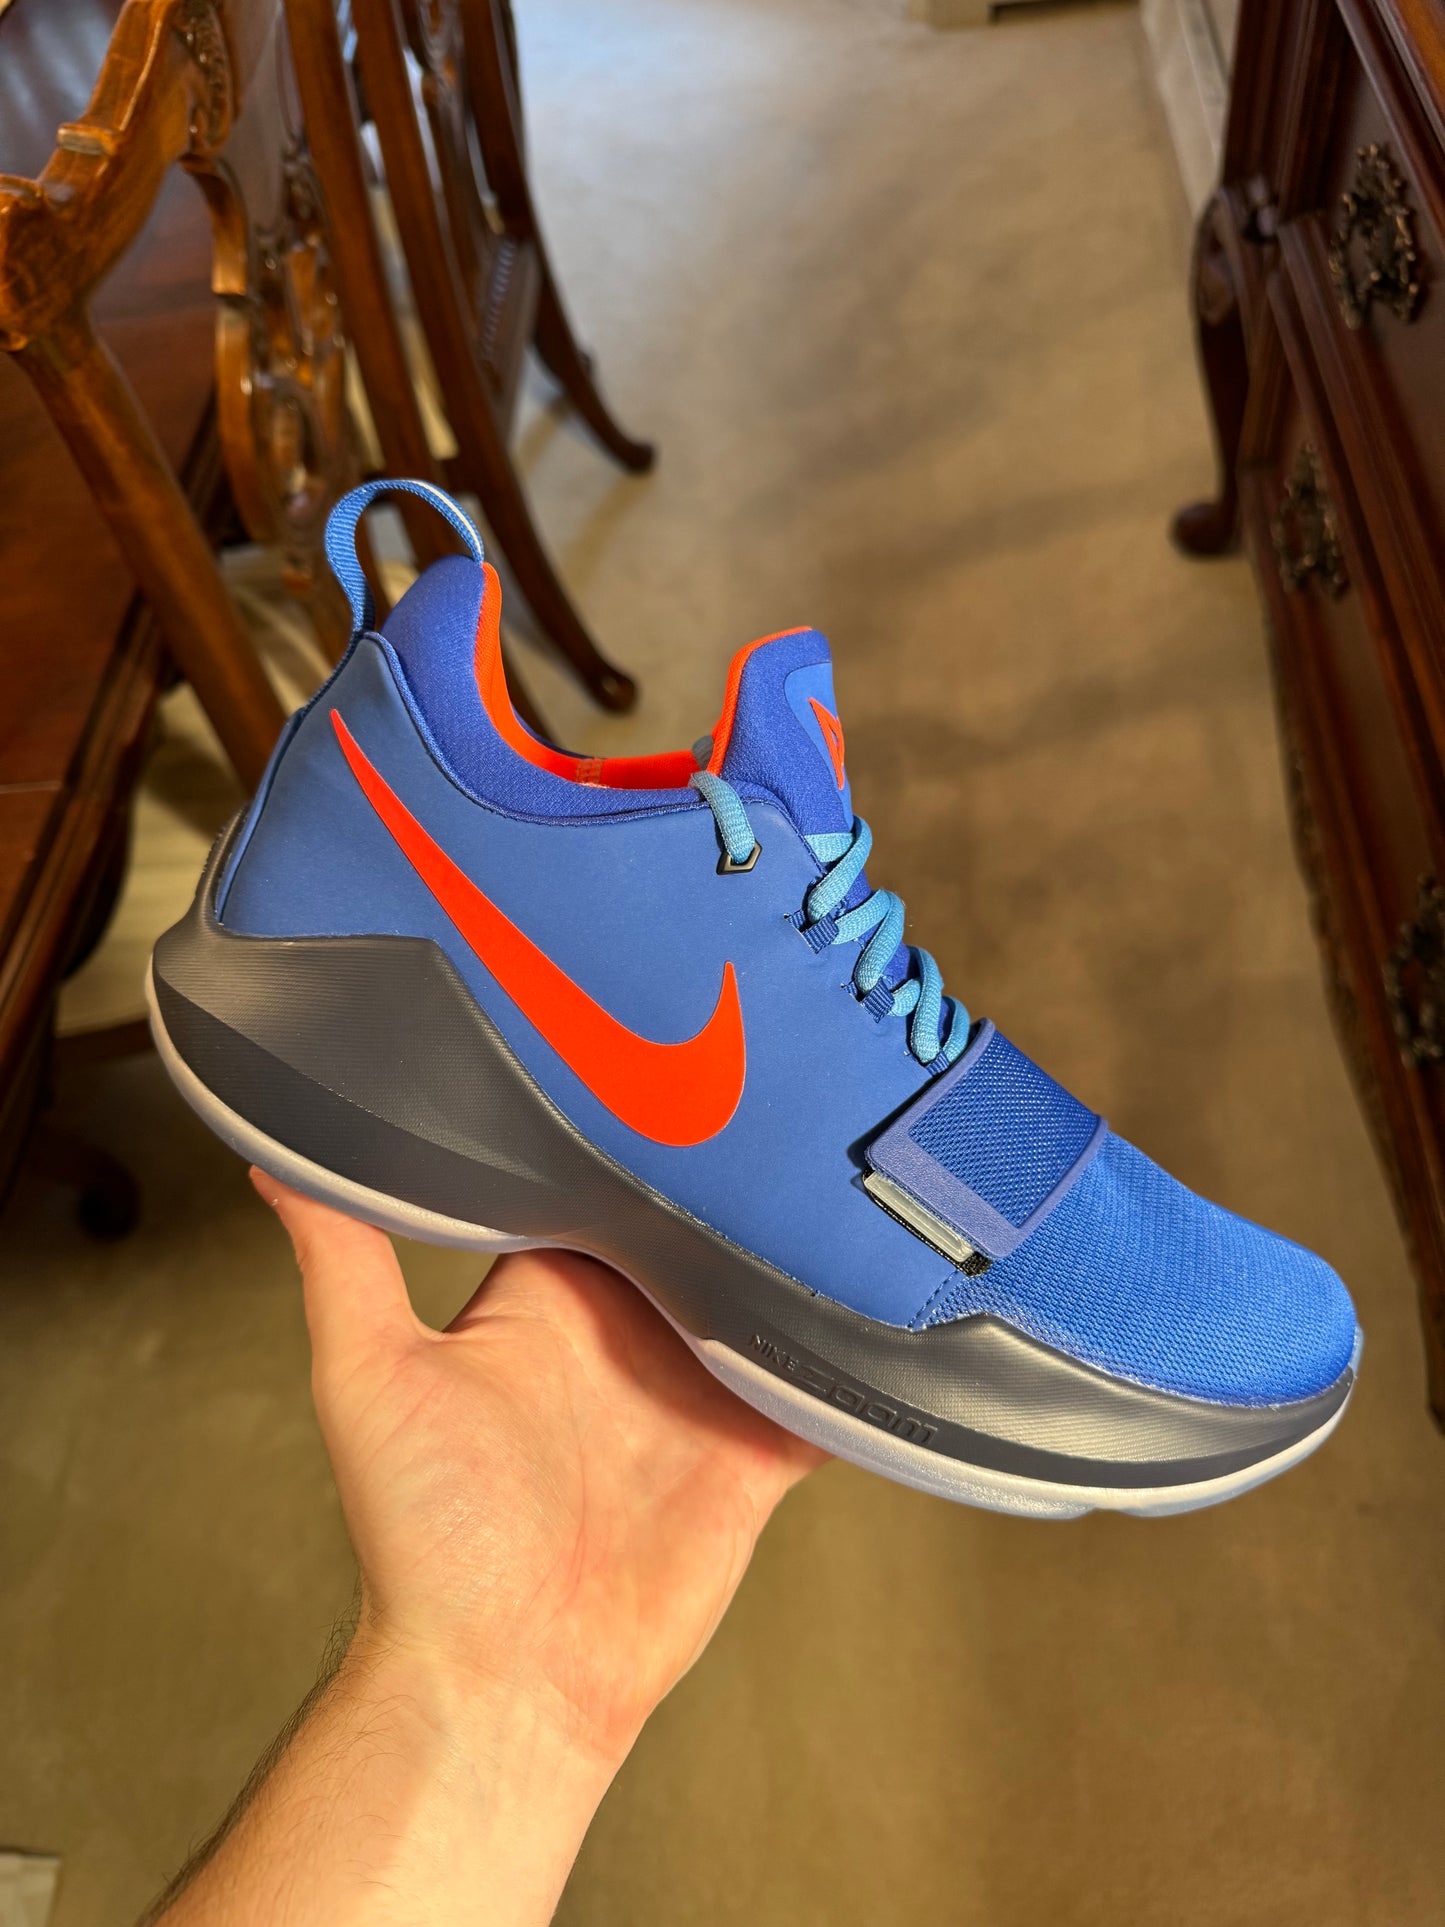 PG 1 iD ‘What The’